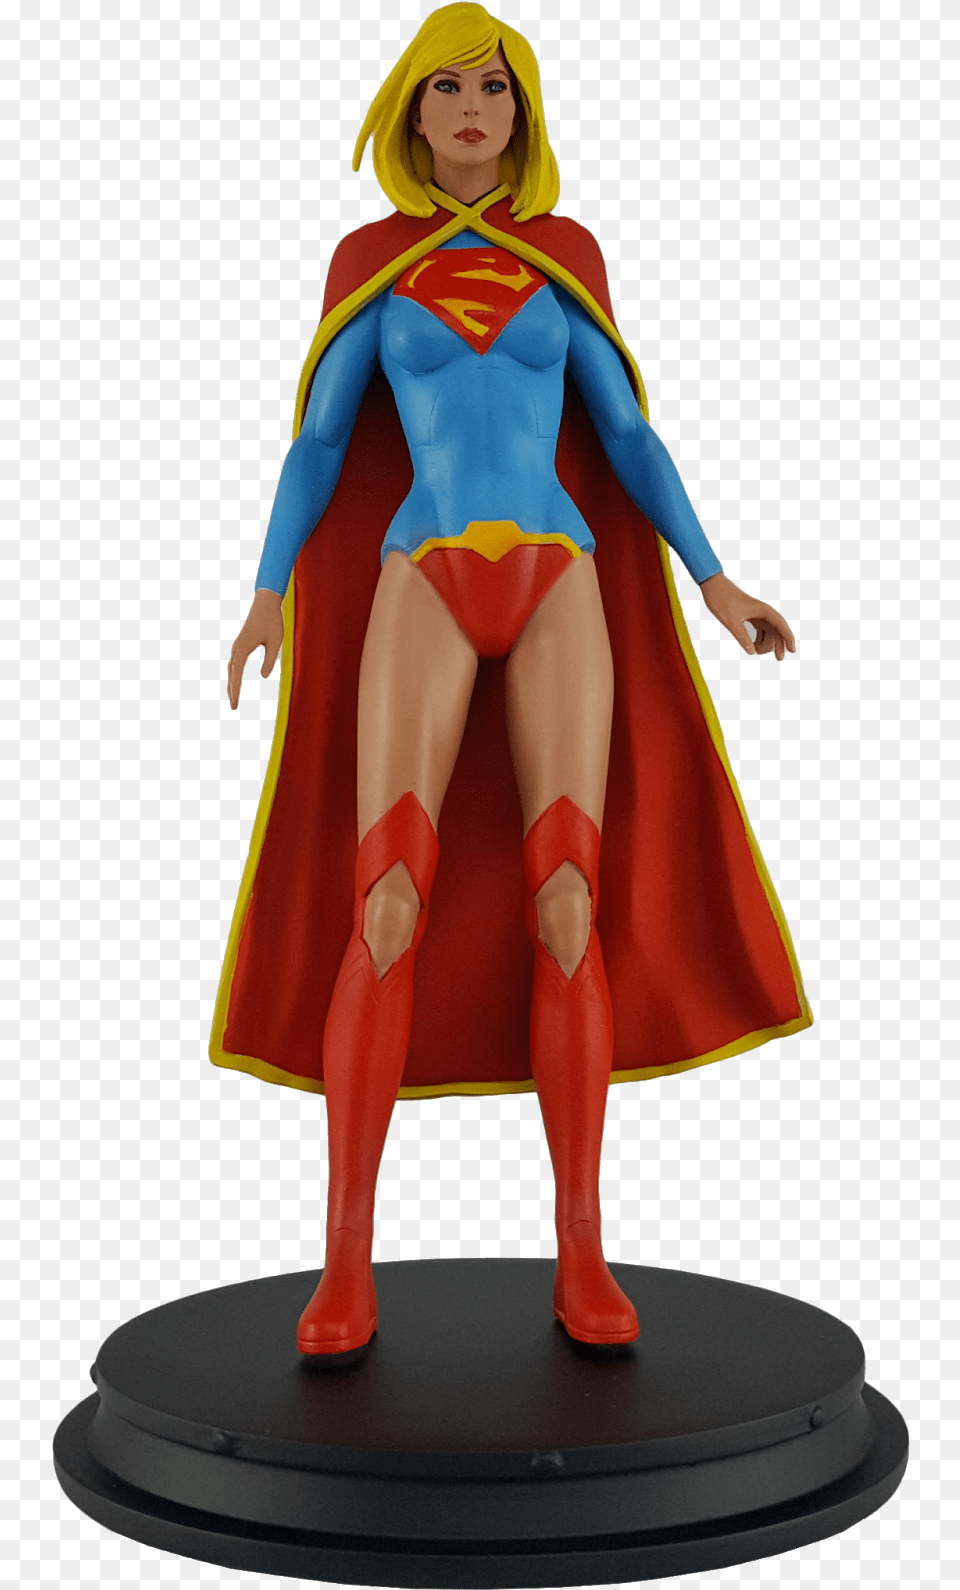 New 52 Supergirl Statue Available 4th Quarter 2019 New 52 Supergirl Statue, Adult, Cape, Clothing, Female Png